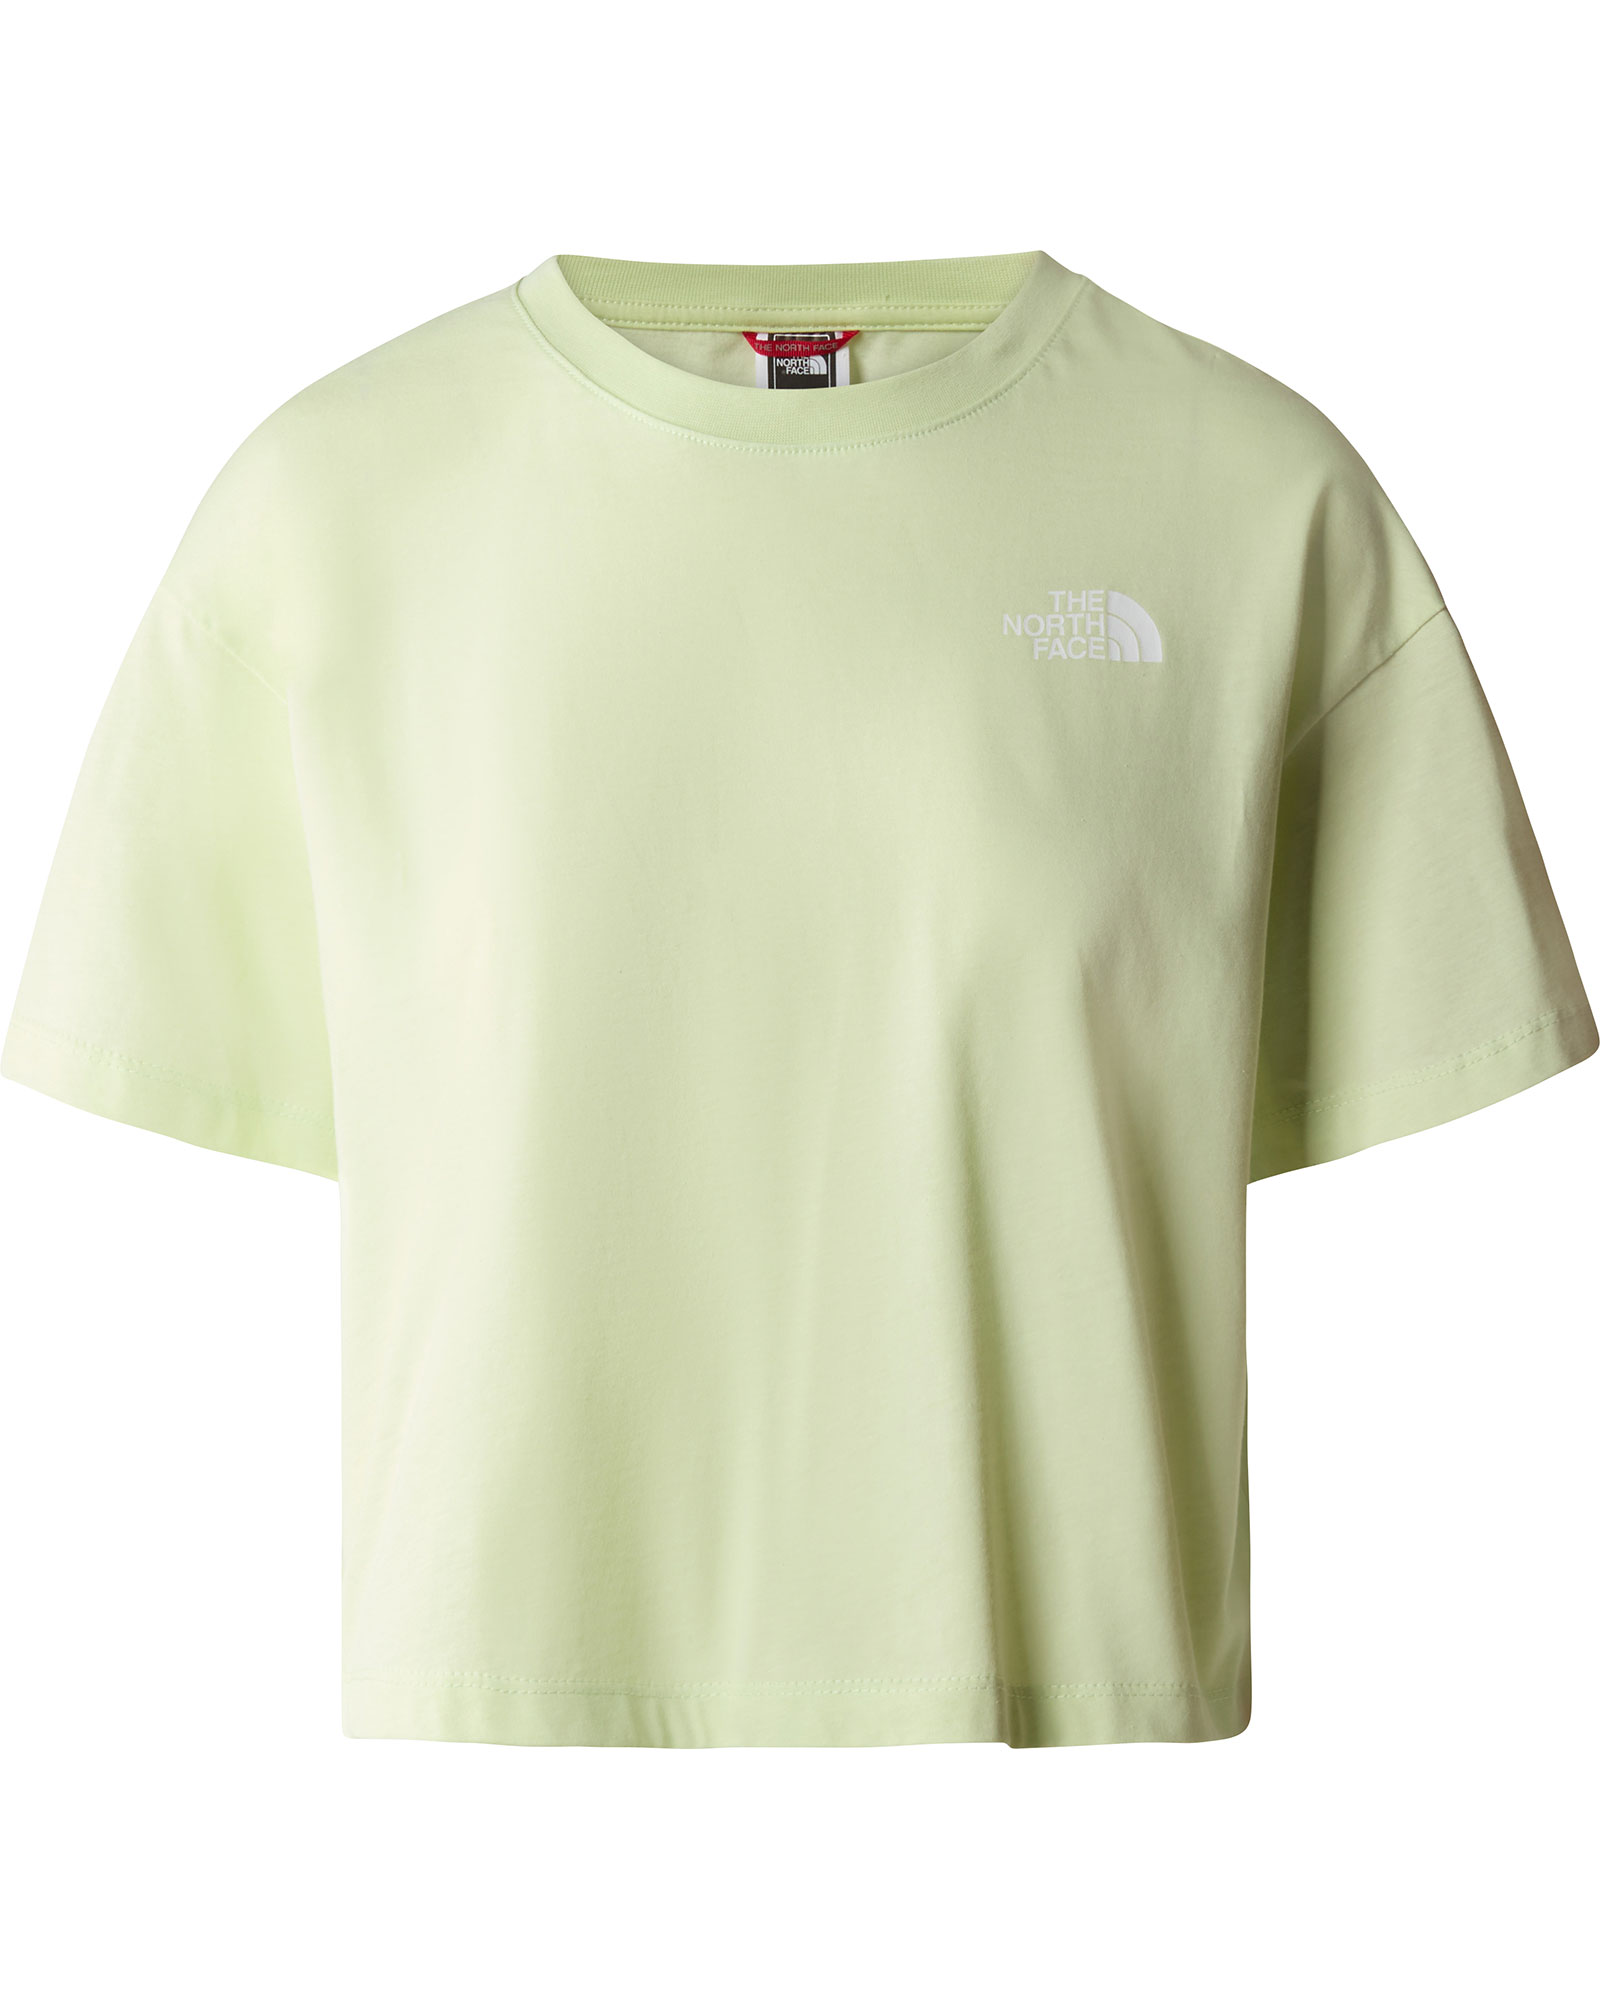 The North Face Cropped Simple Dome Women’s T Shirt - Lime Cream XS